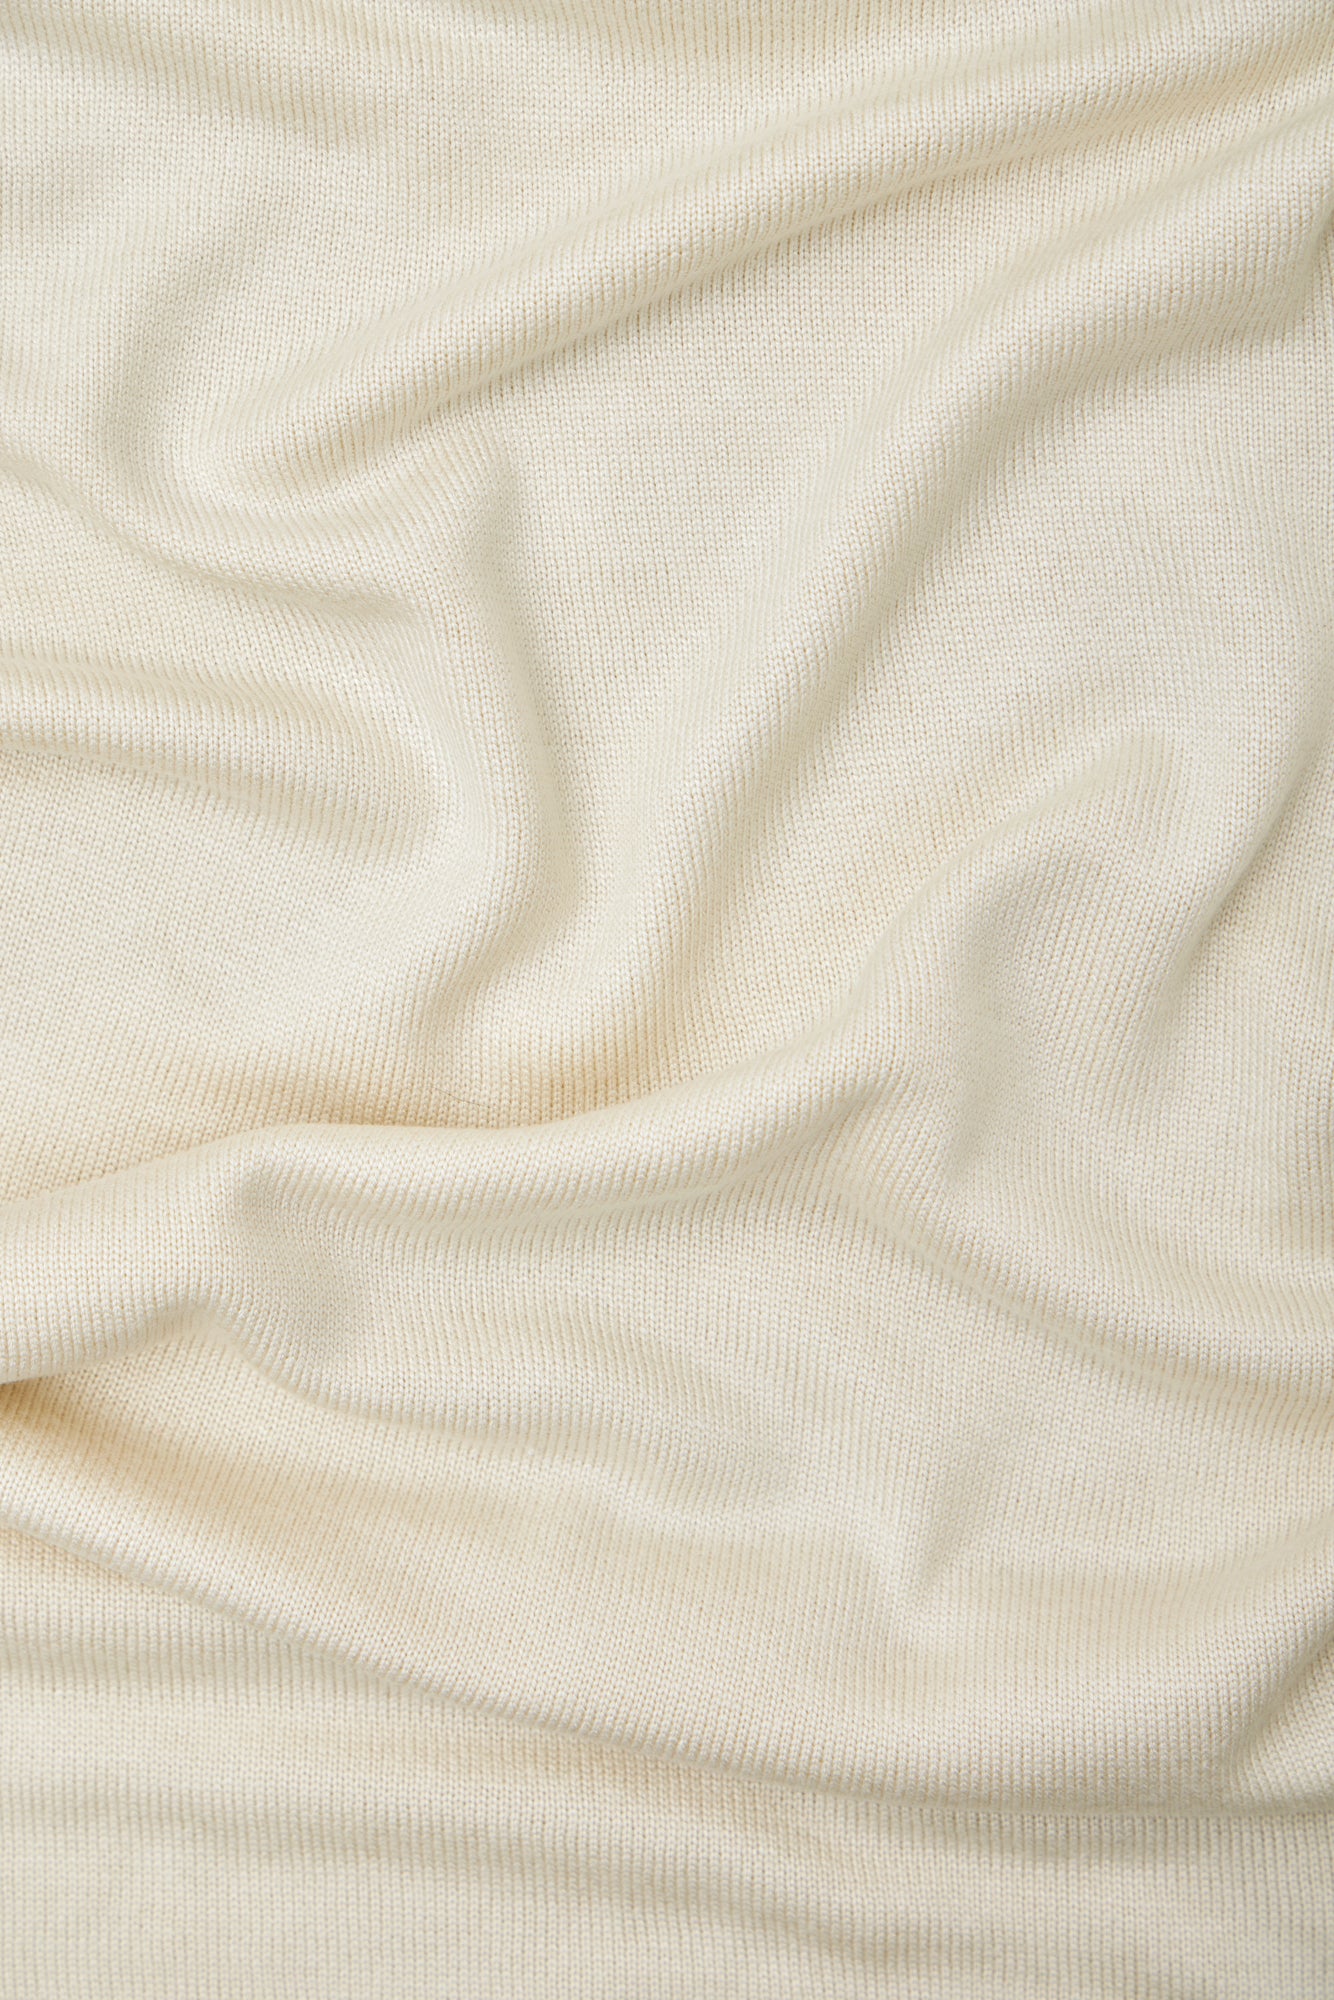 Close up of shell (cream) Ecovero knit sewing fabric